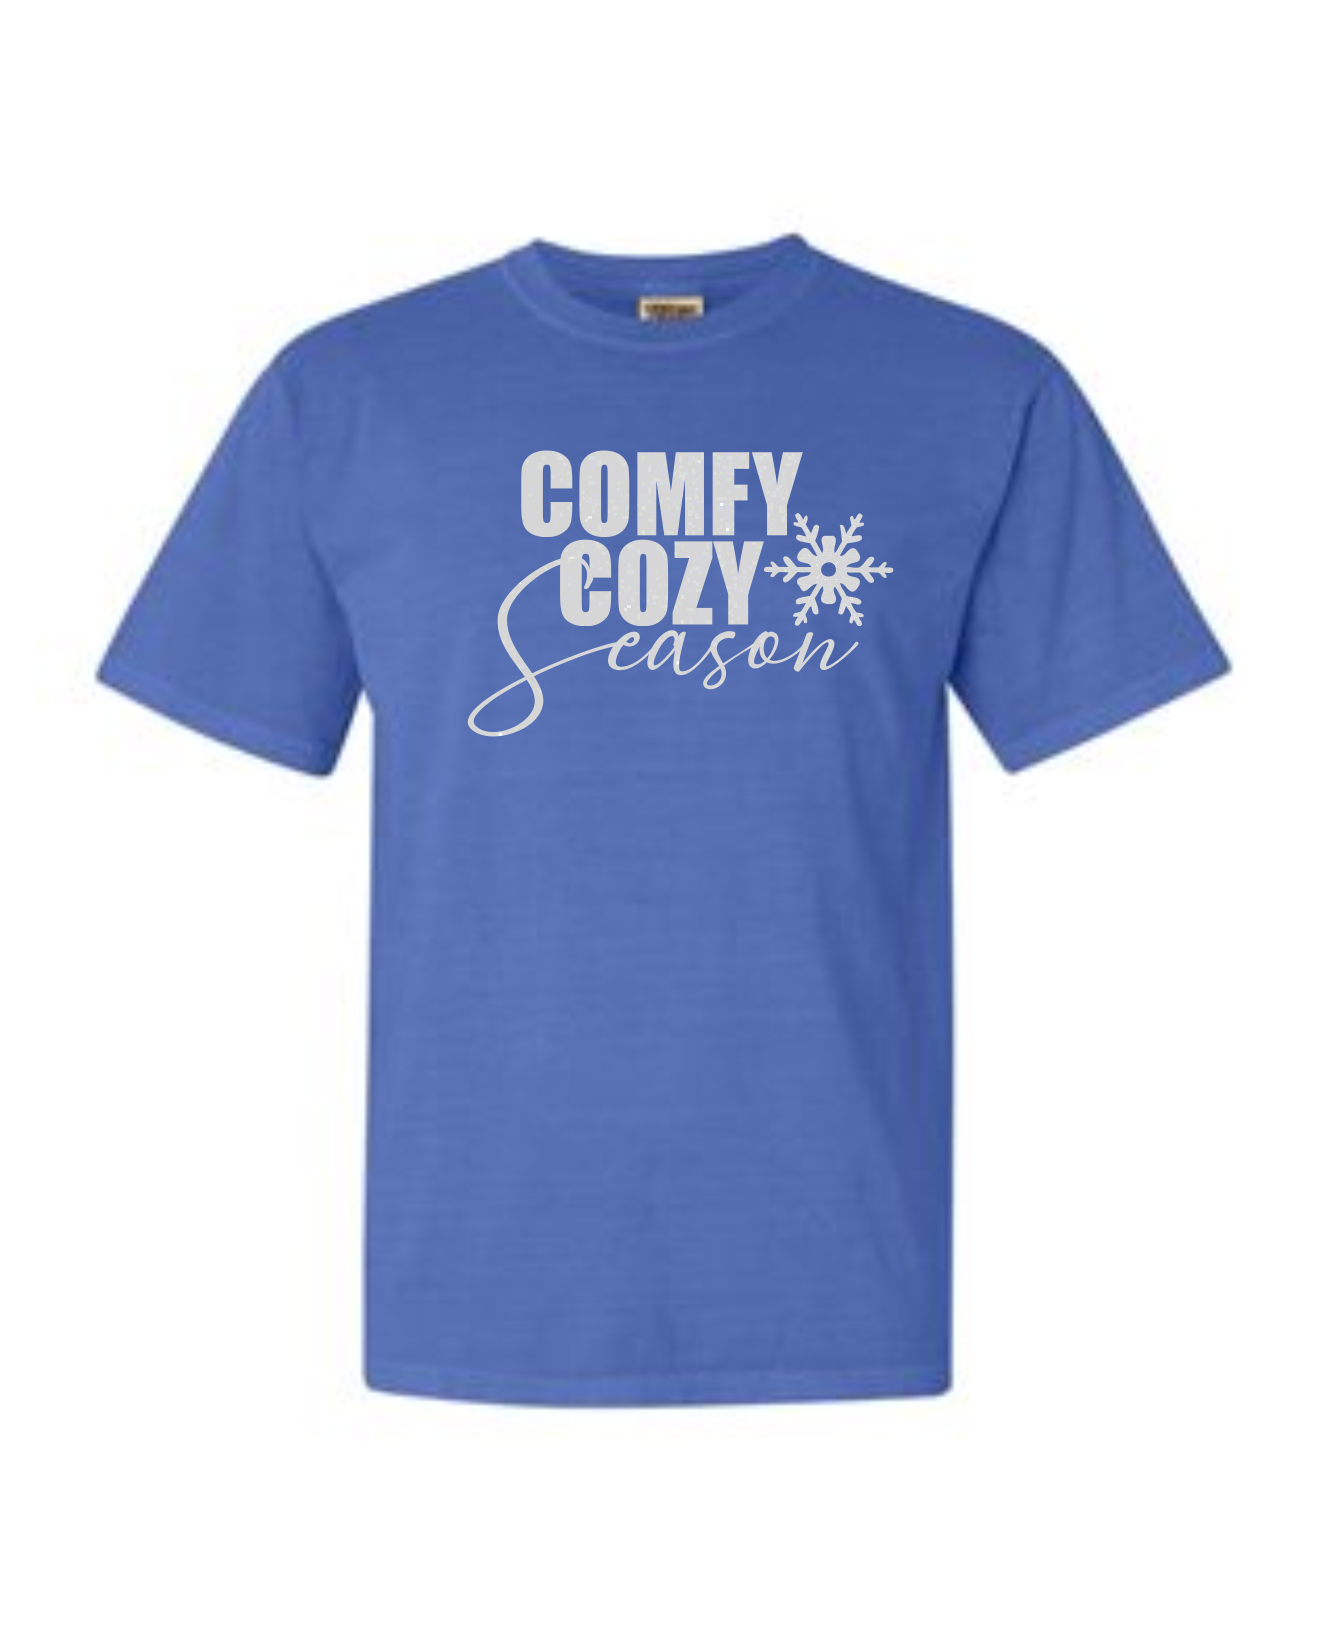 Comfy Cozy Short Sleeve Graphic T-shirt